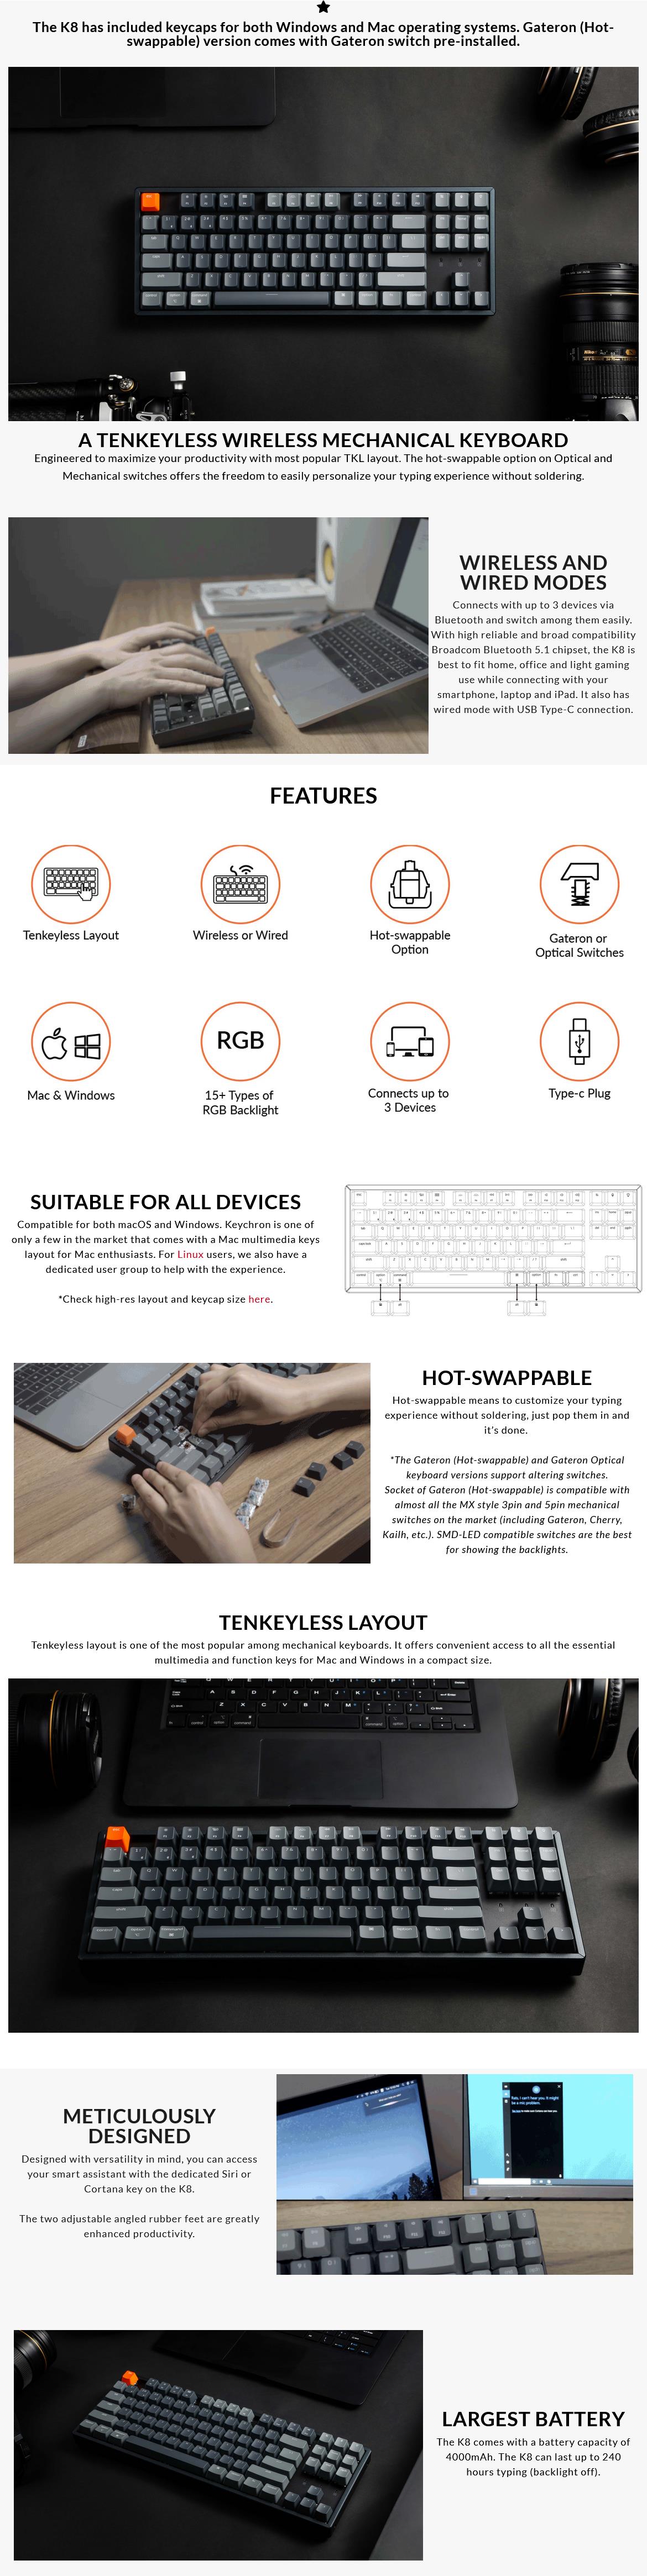 A large marketing image providing additional information about the product Keychron K8 TKL RGB Wireless Hot-swappable Mechanical Keyboard (Brown Switch) - Additional alt info not provided